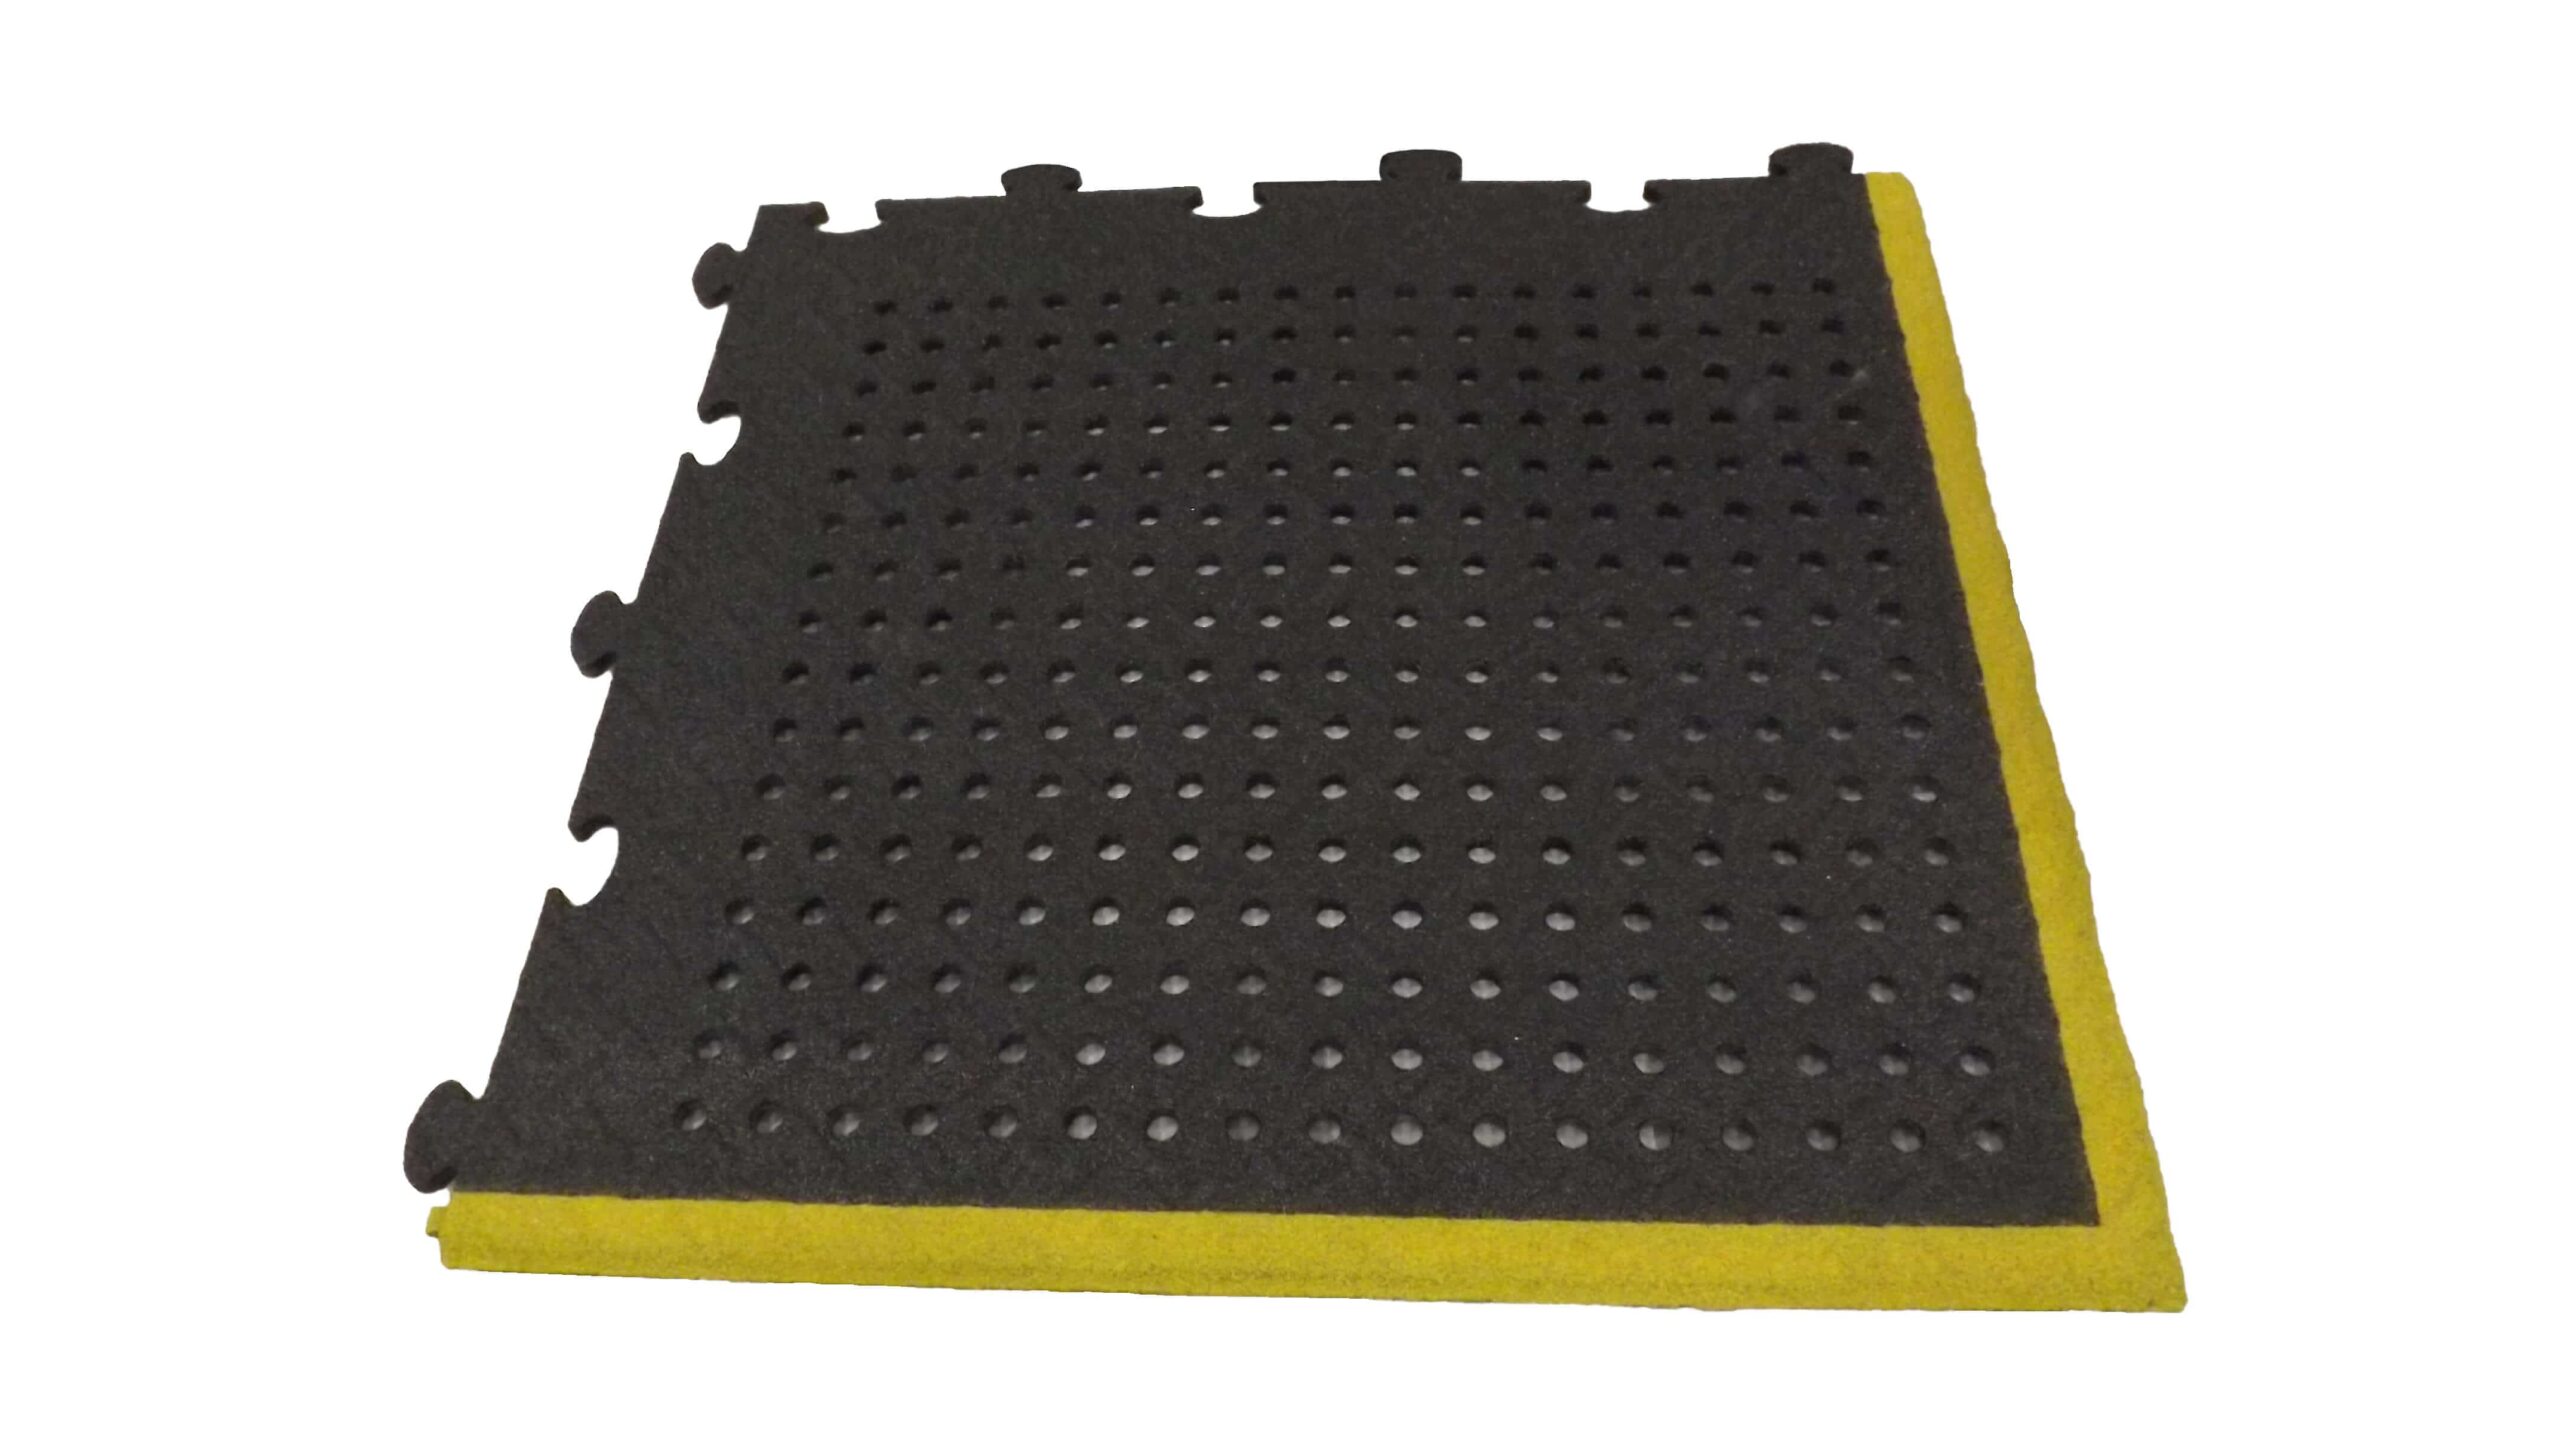 Heavyweight two tone yellow and black industrial mat with holes in it